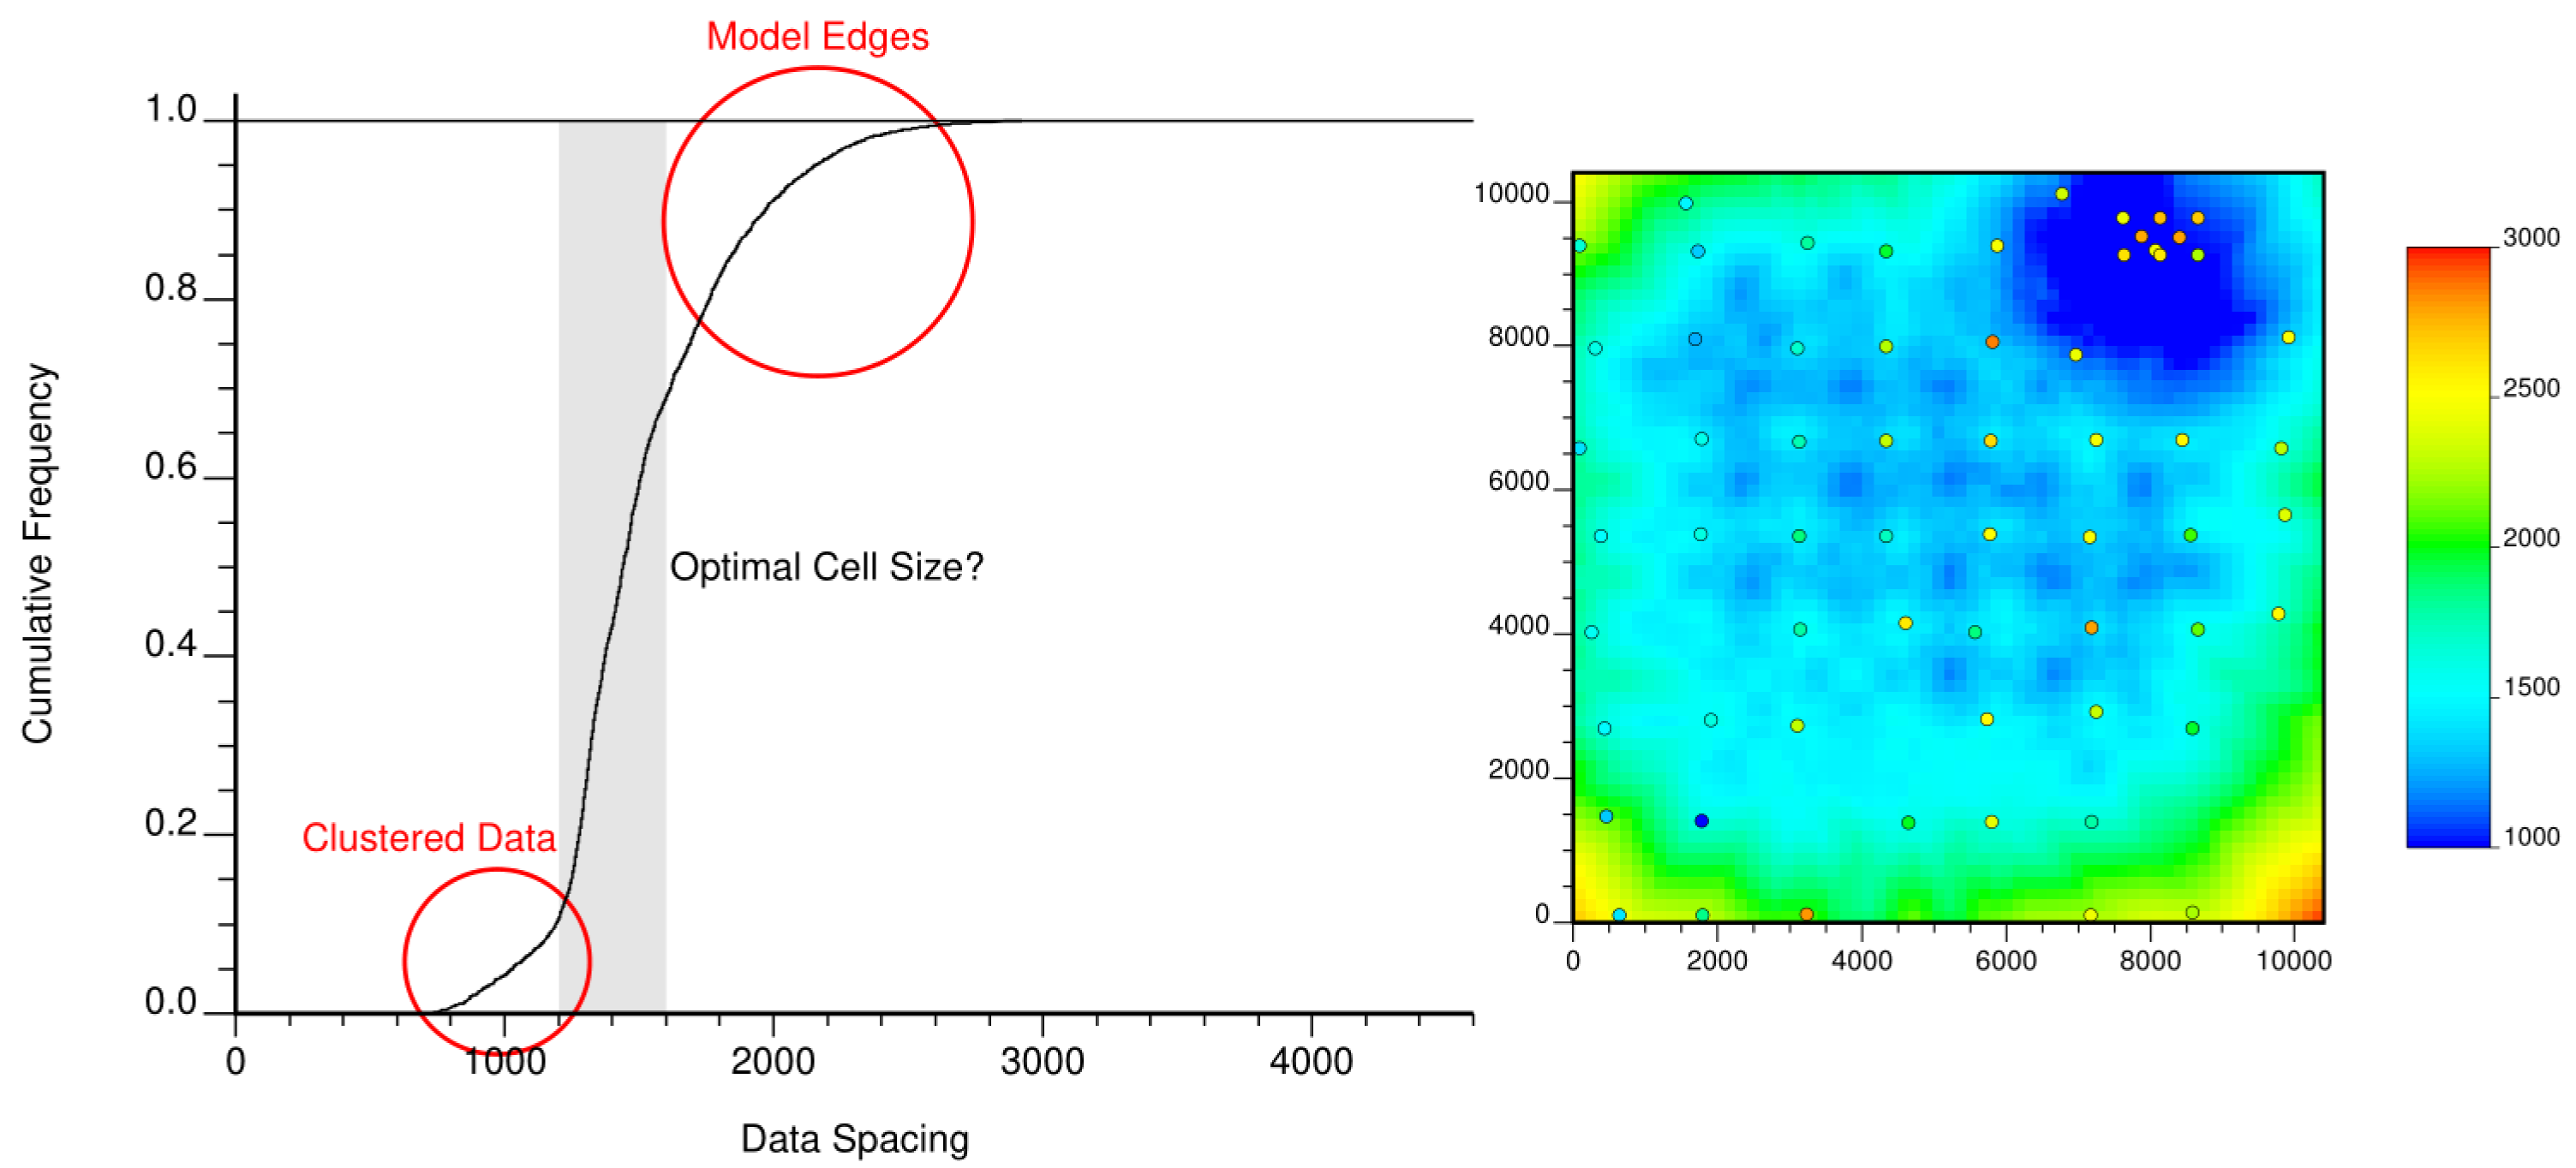 A CDF of data spacing over a model area with a map of the data spacing to the right.